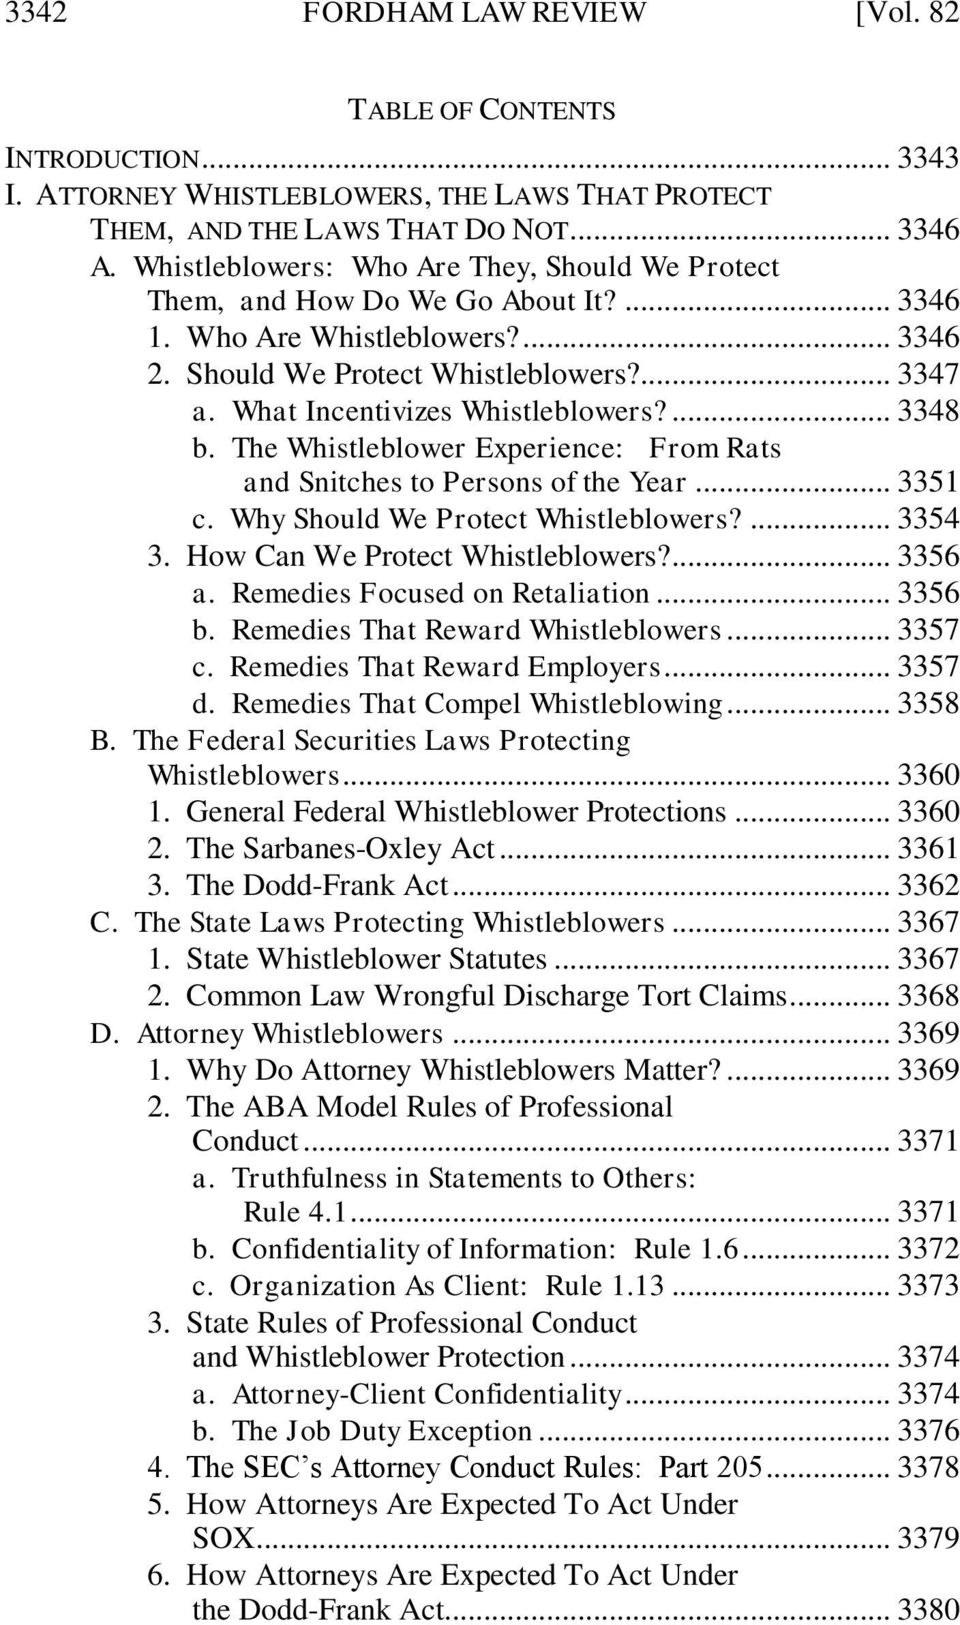 What Incentivizes Whistleblowers?... 3348 b. The Whistleblower Experience: From Rats and Snitches to Persons of the Year... 3351 c. Why Should We Protect Whistleblowers?... 3354 3.